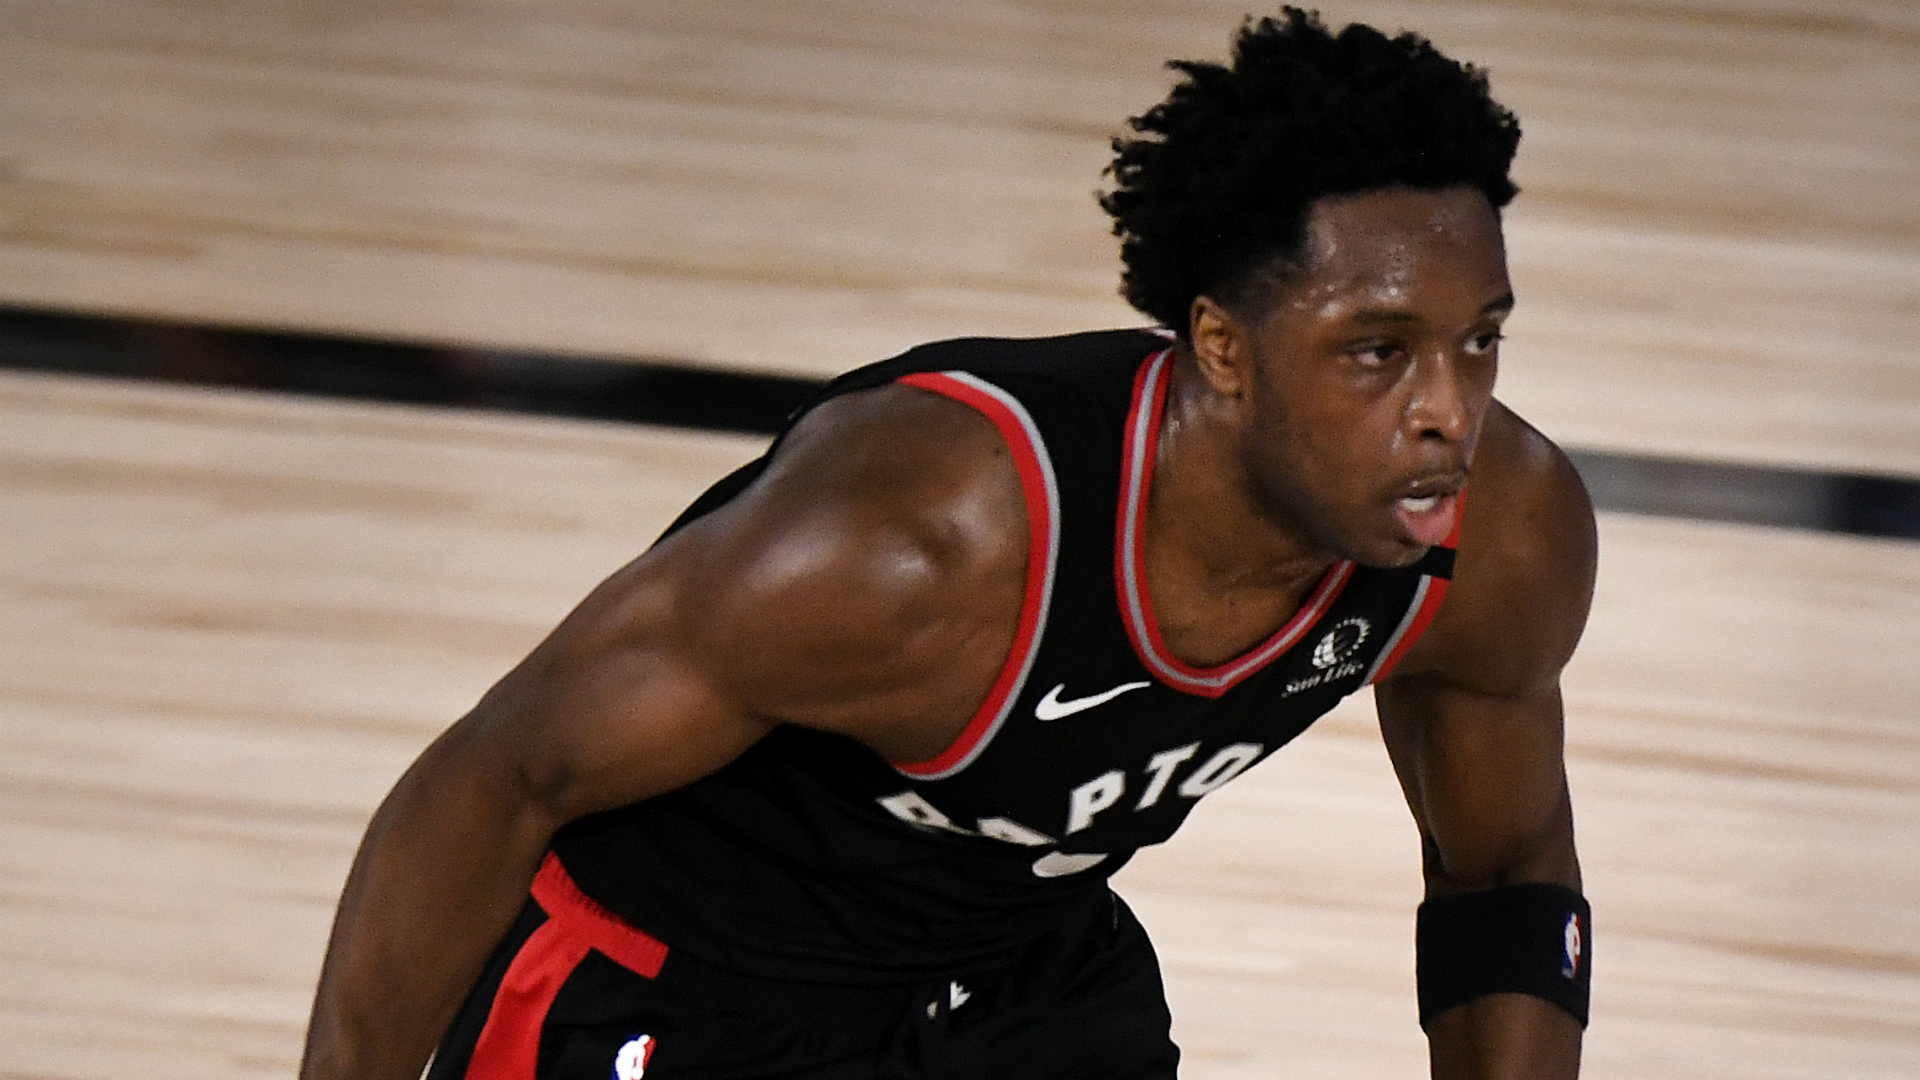 'I don't shoot trying to miss' – Raptors' Anunoby not surprised to hit game-winning shot